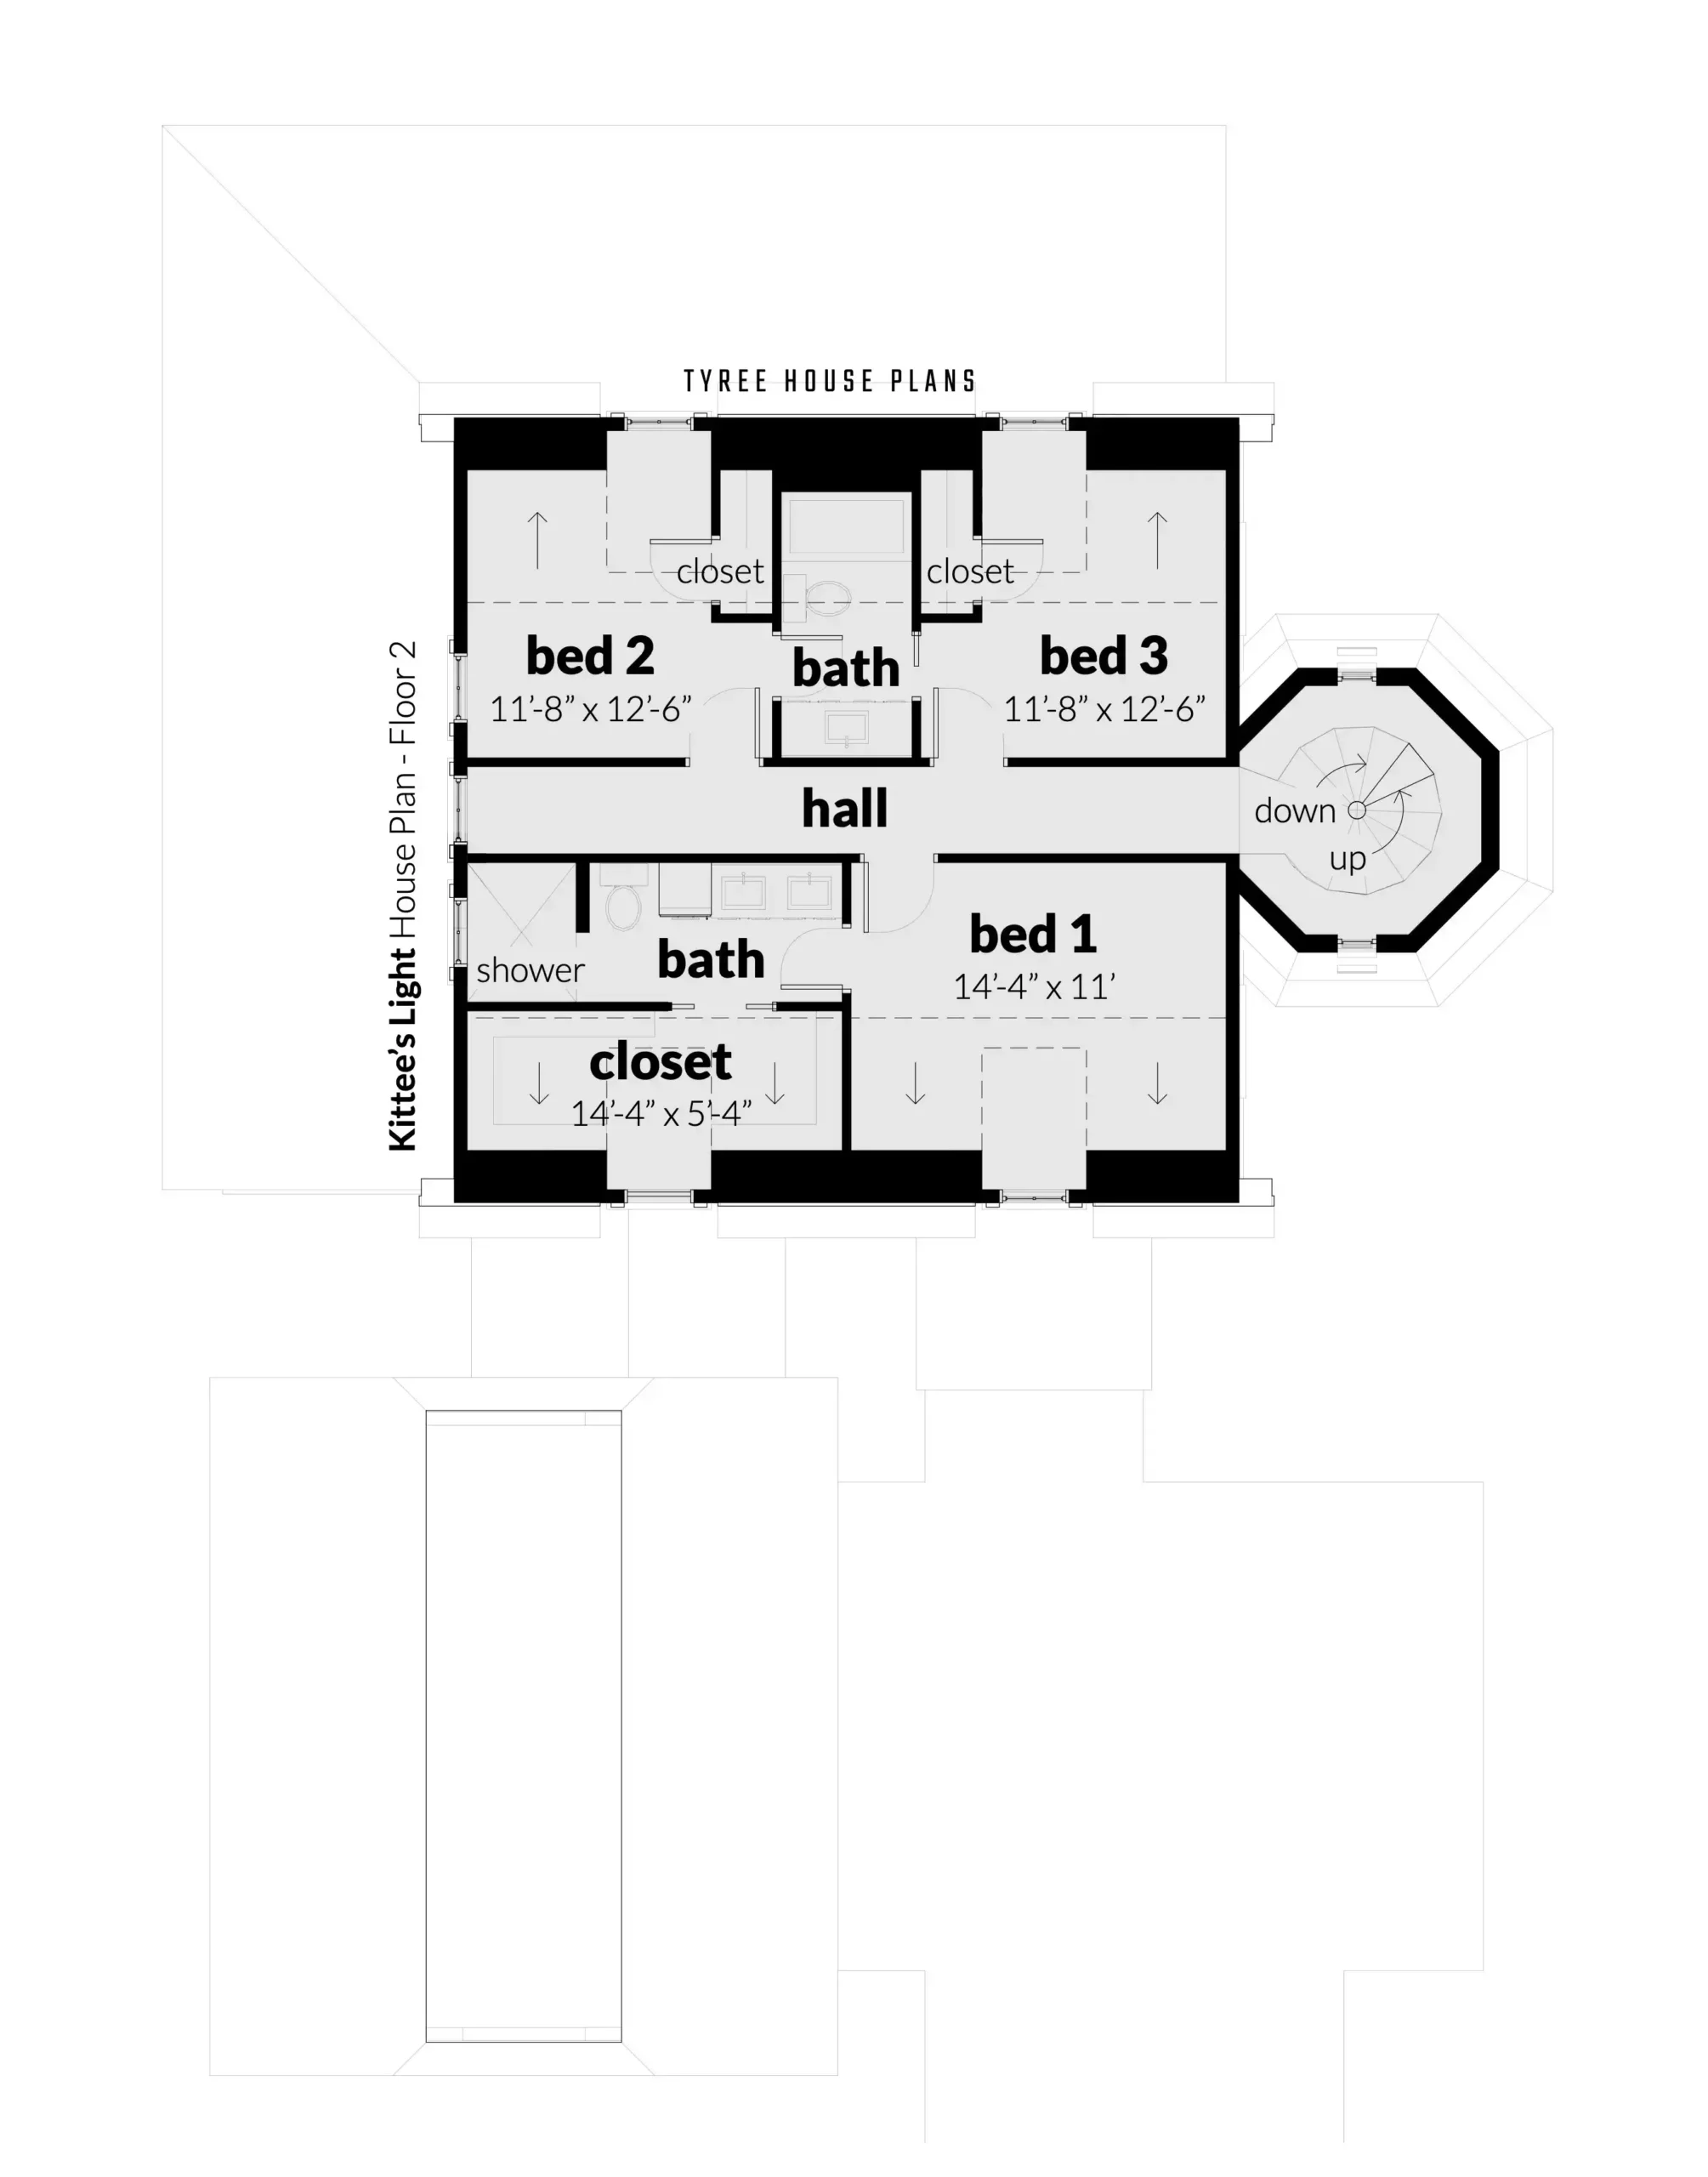 Floor 2. Kittee's Lighthouse by Tyree House Plans